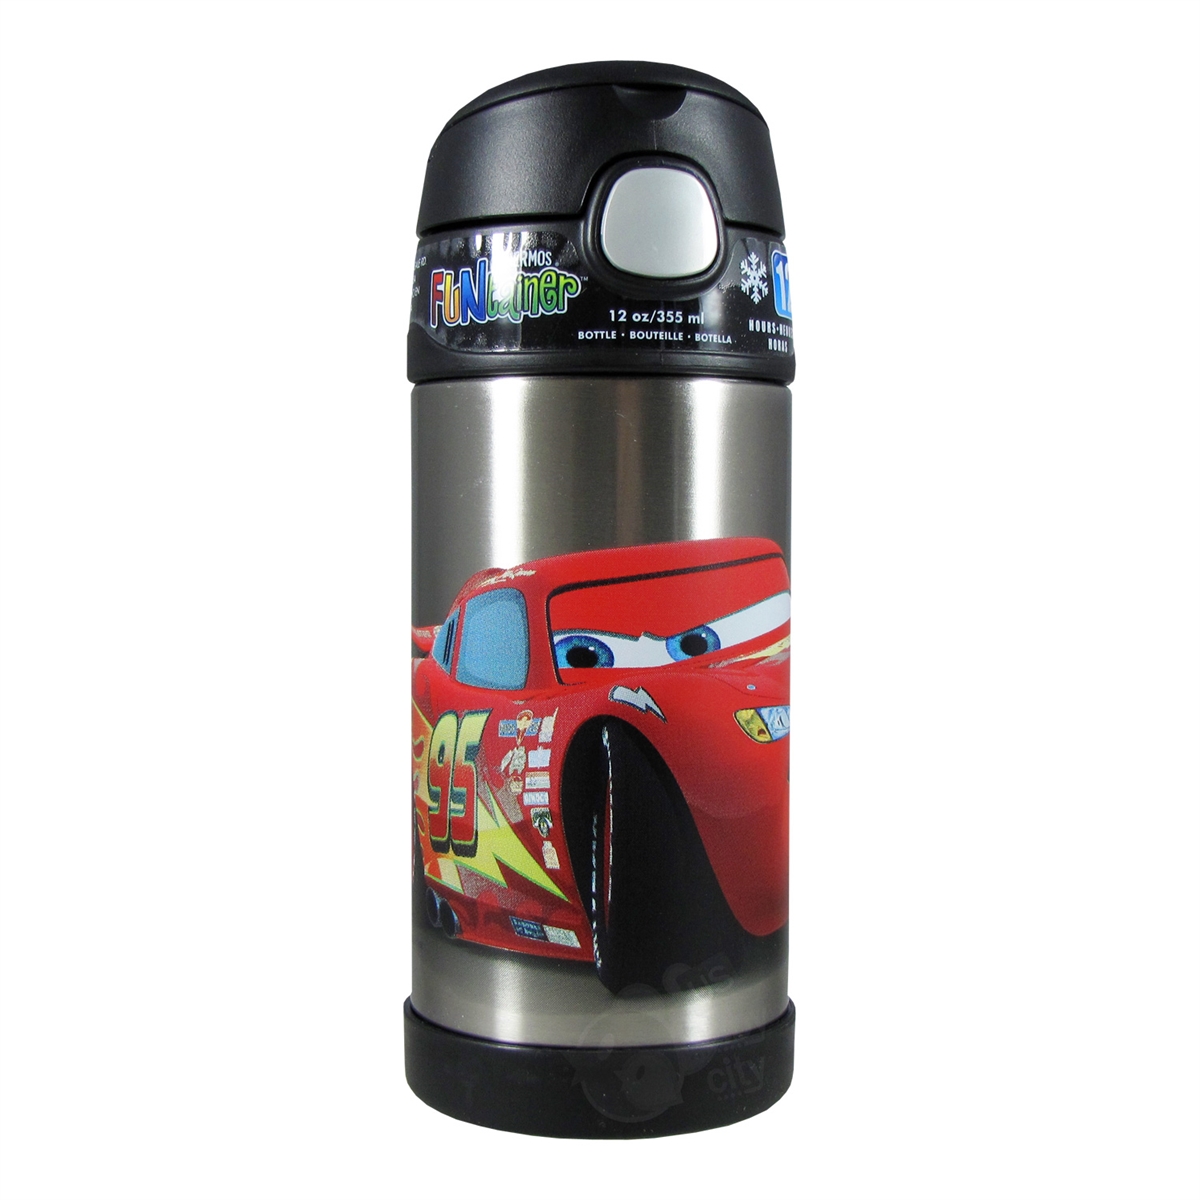 Thermos 10 oz. Kid's Funtainer Vacuum Insulated Stainless Steel Food Jar Cars